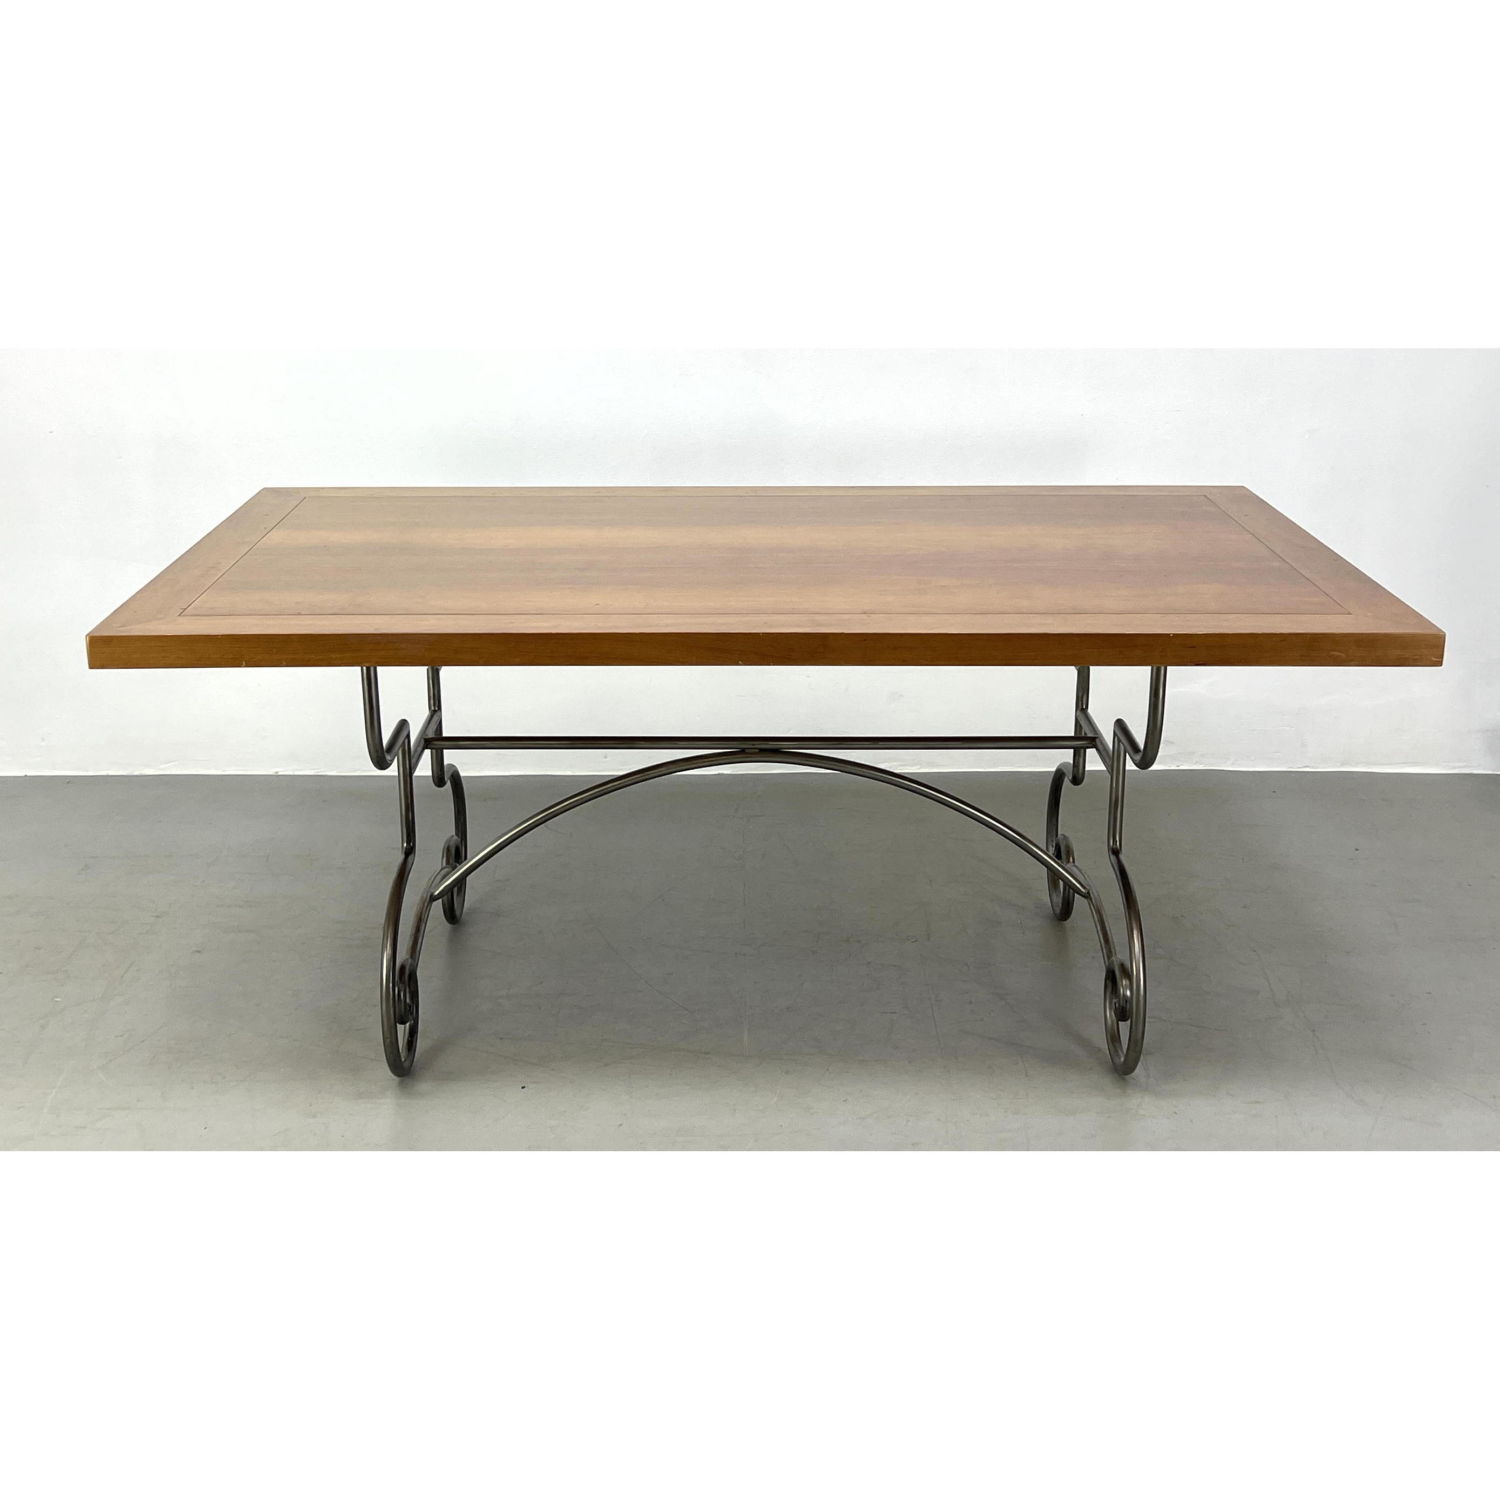 Decorative Steel Base Dining Table.